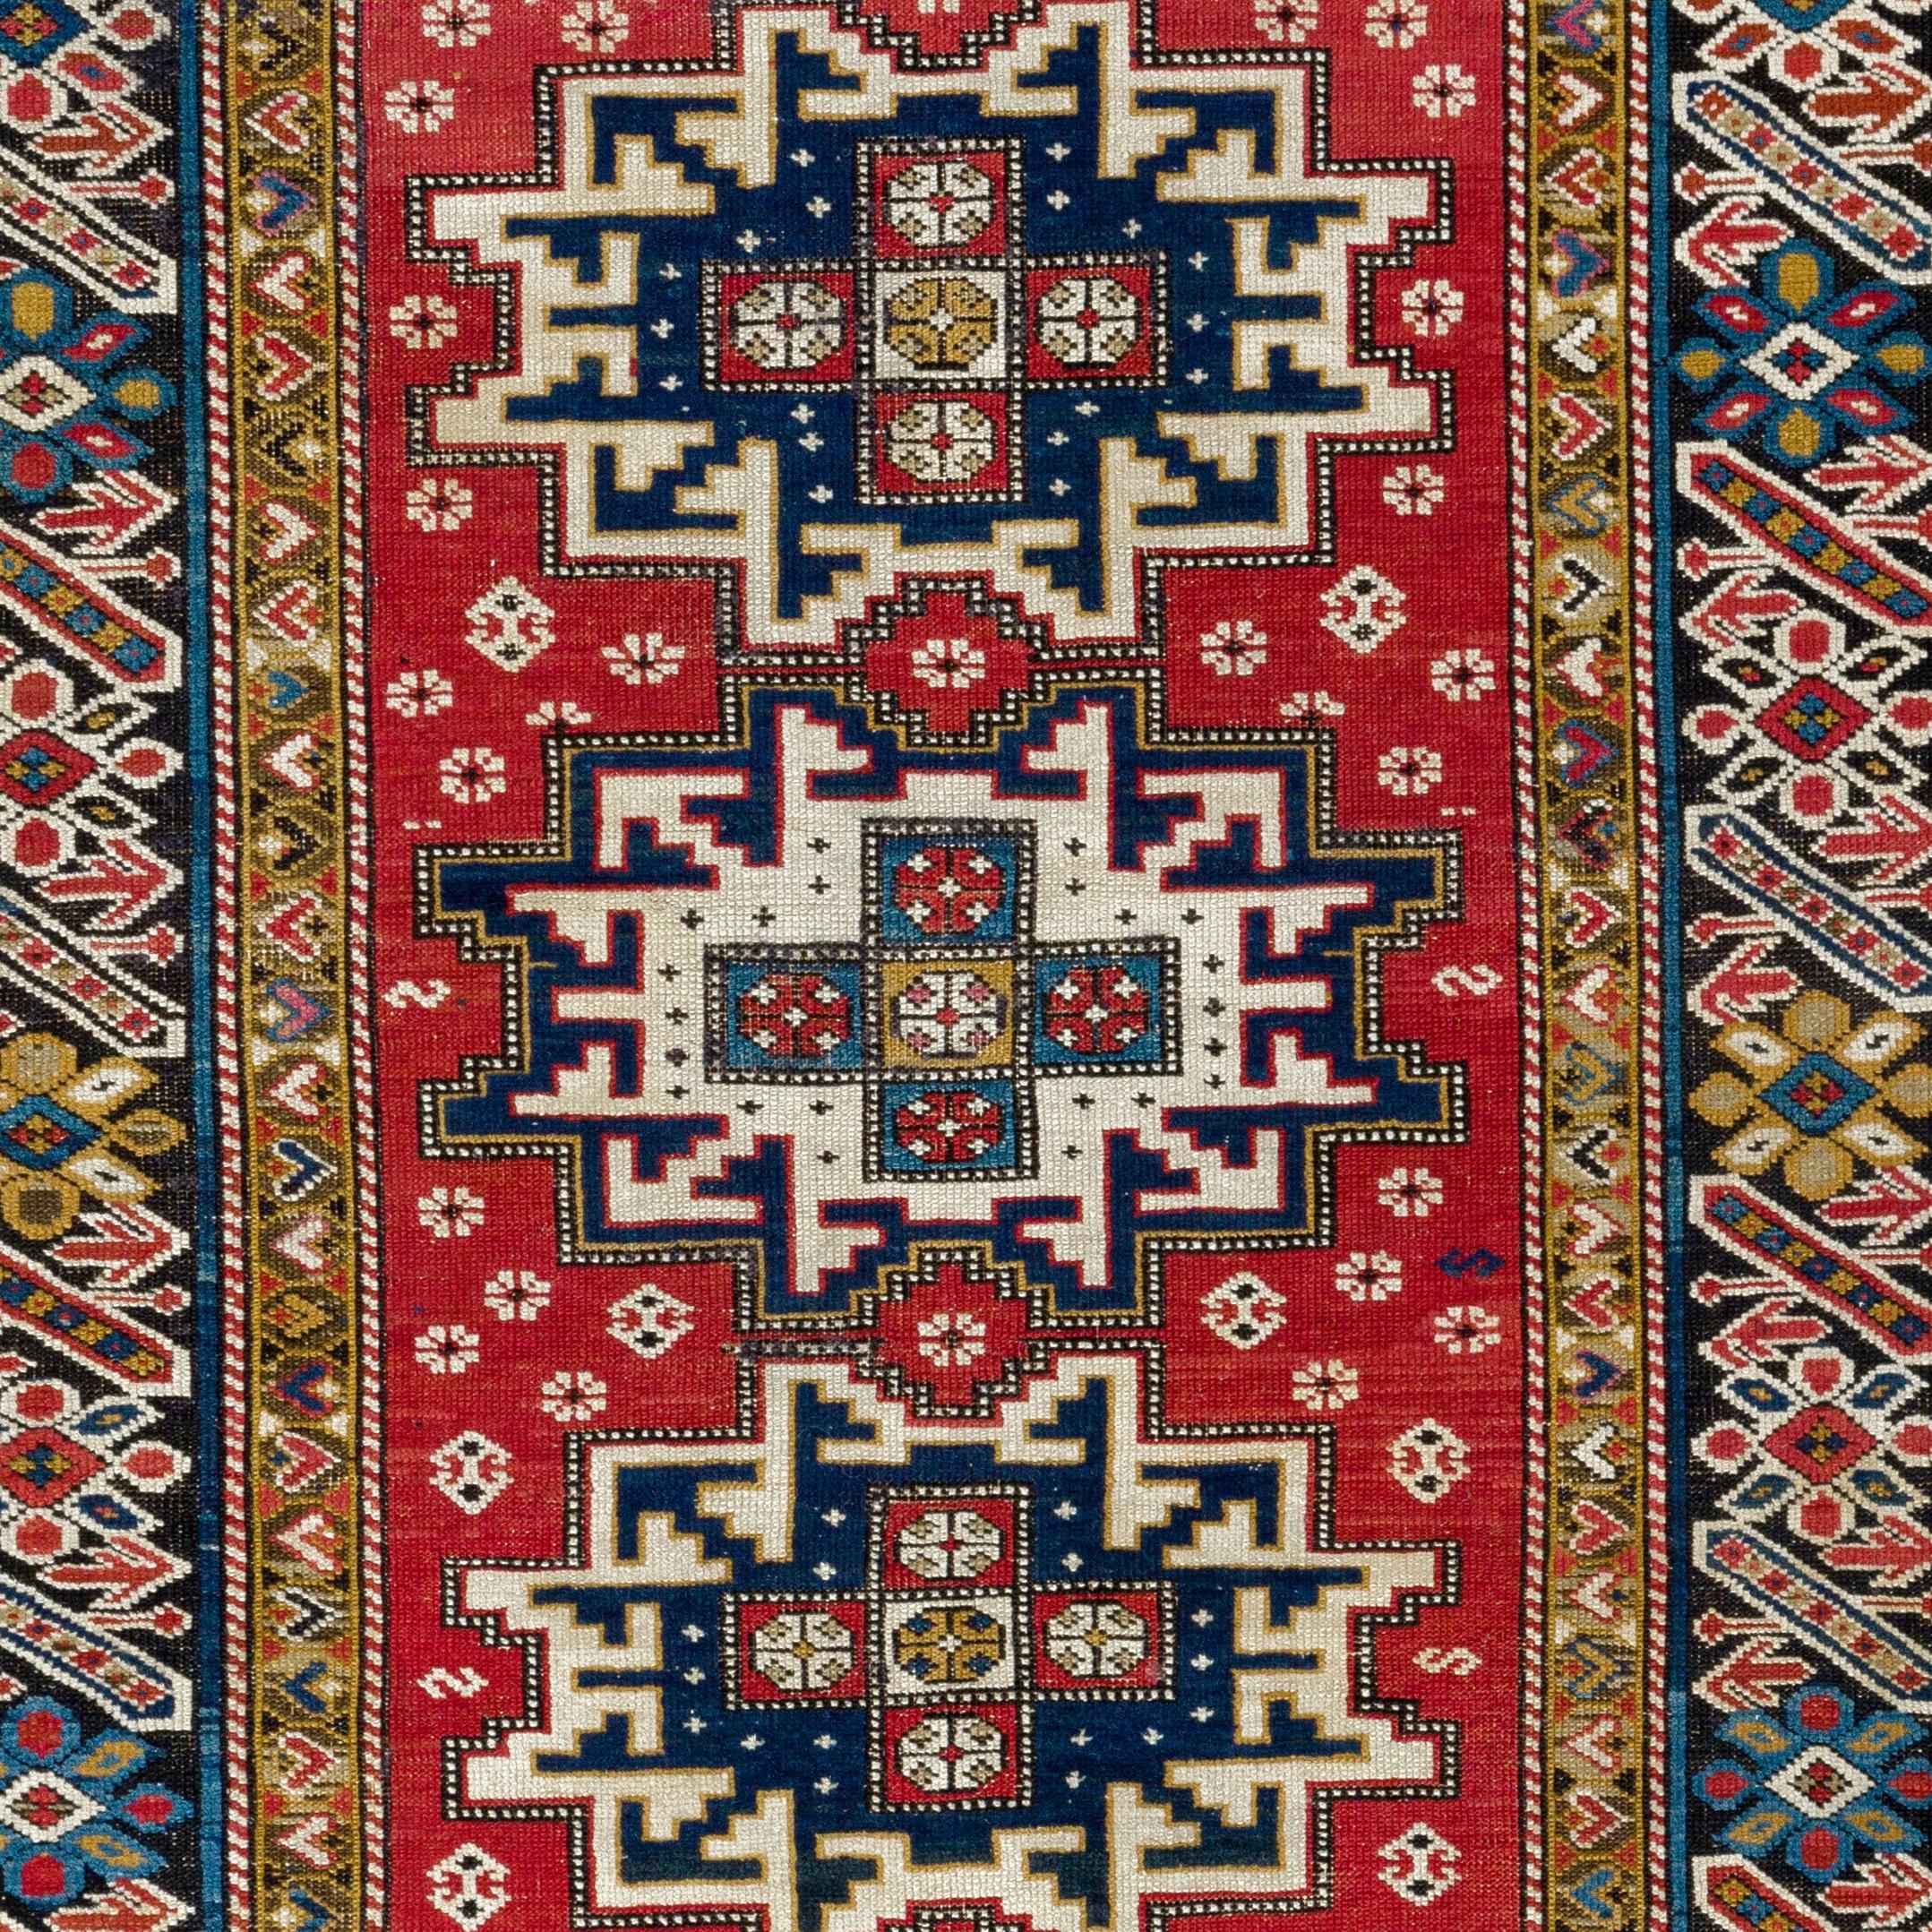 Antique Caucasian Chi Chi Shirvan rug. Finely hand-knotted with even medium wool pile on wool foundation. Very good condition. Washed professionally.
Size: 4 x 6.3 ft.